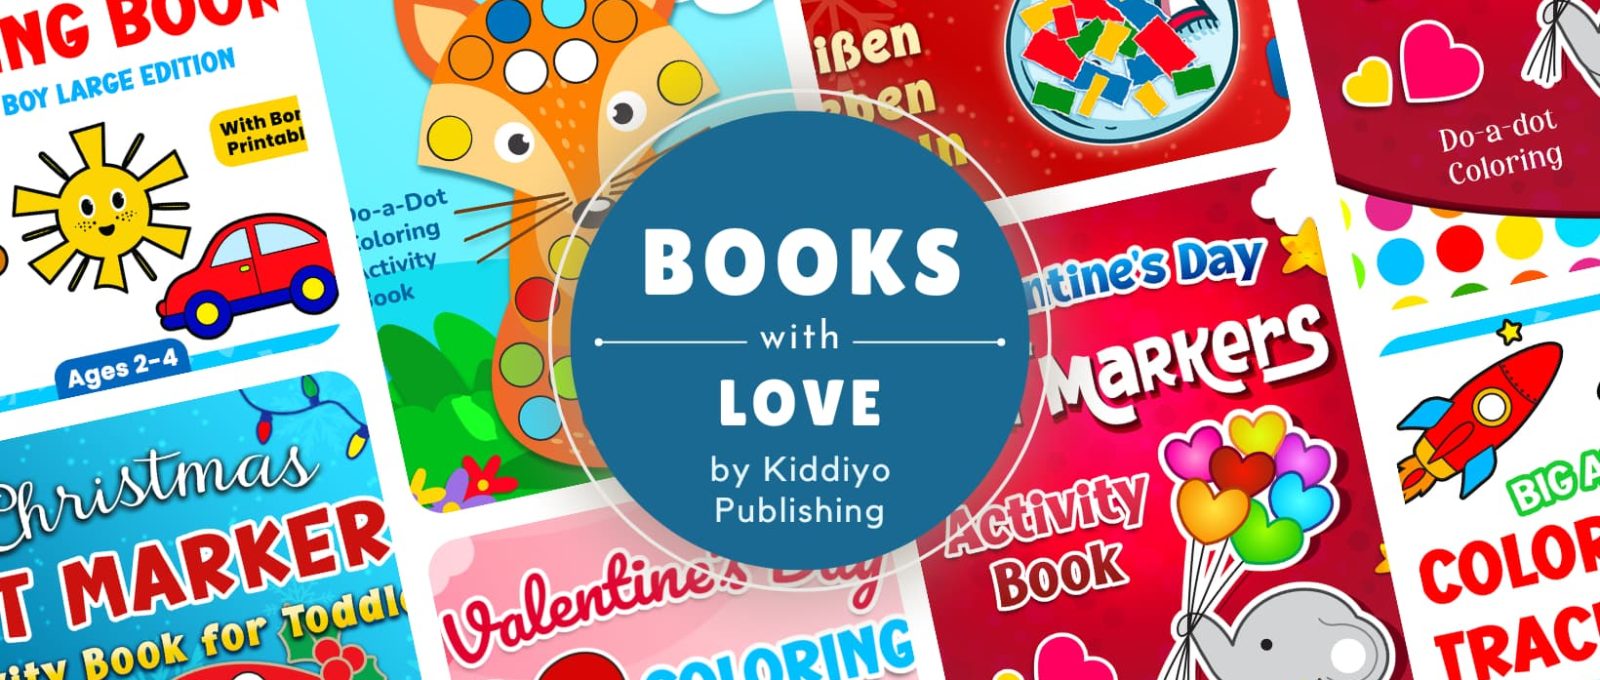 Children’s Books for Toddlers and Preschoolers